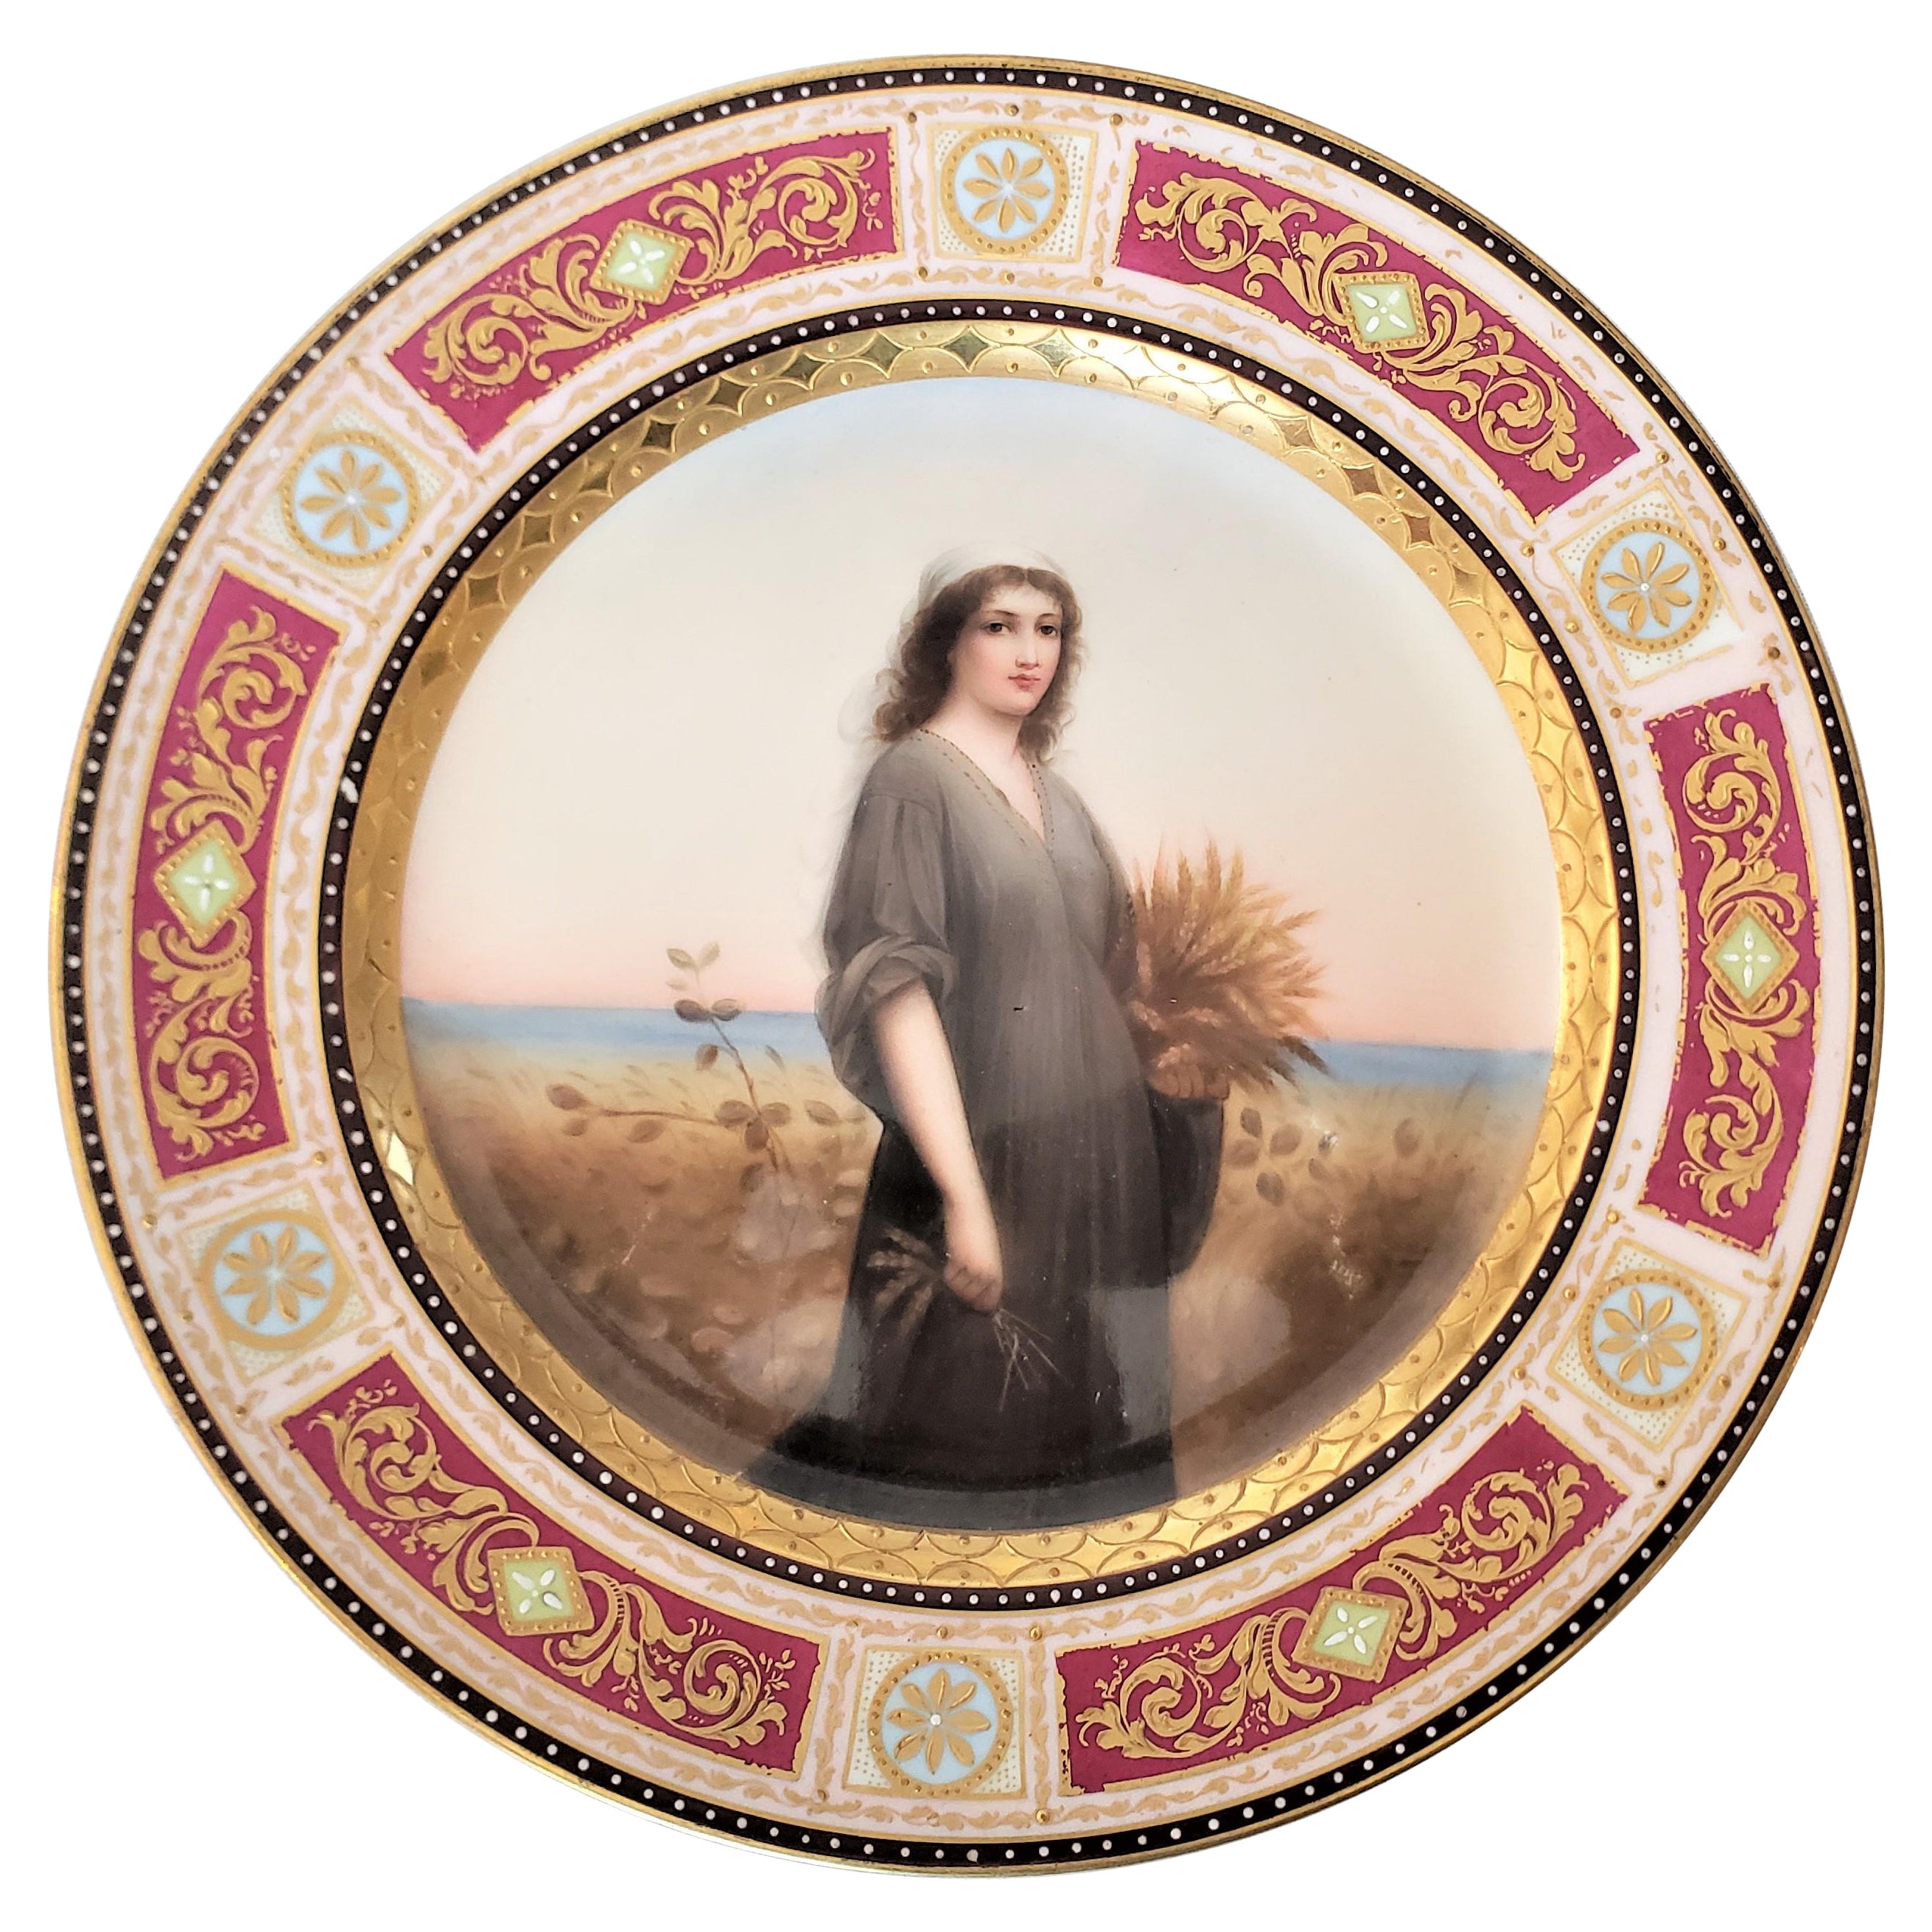 Antique KPM Hand-Painted Porcelain Cabinet Plate Depicting the Biblical "Ruth"